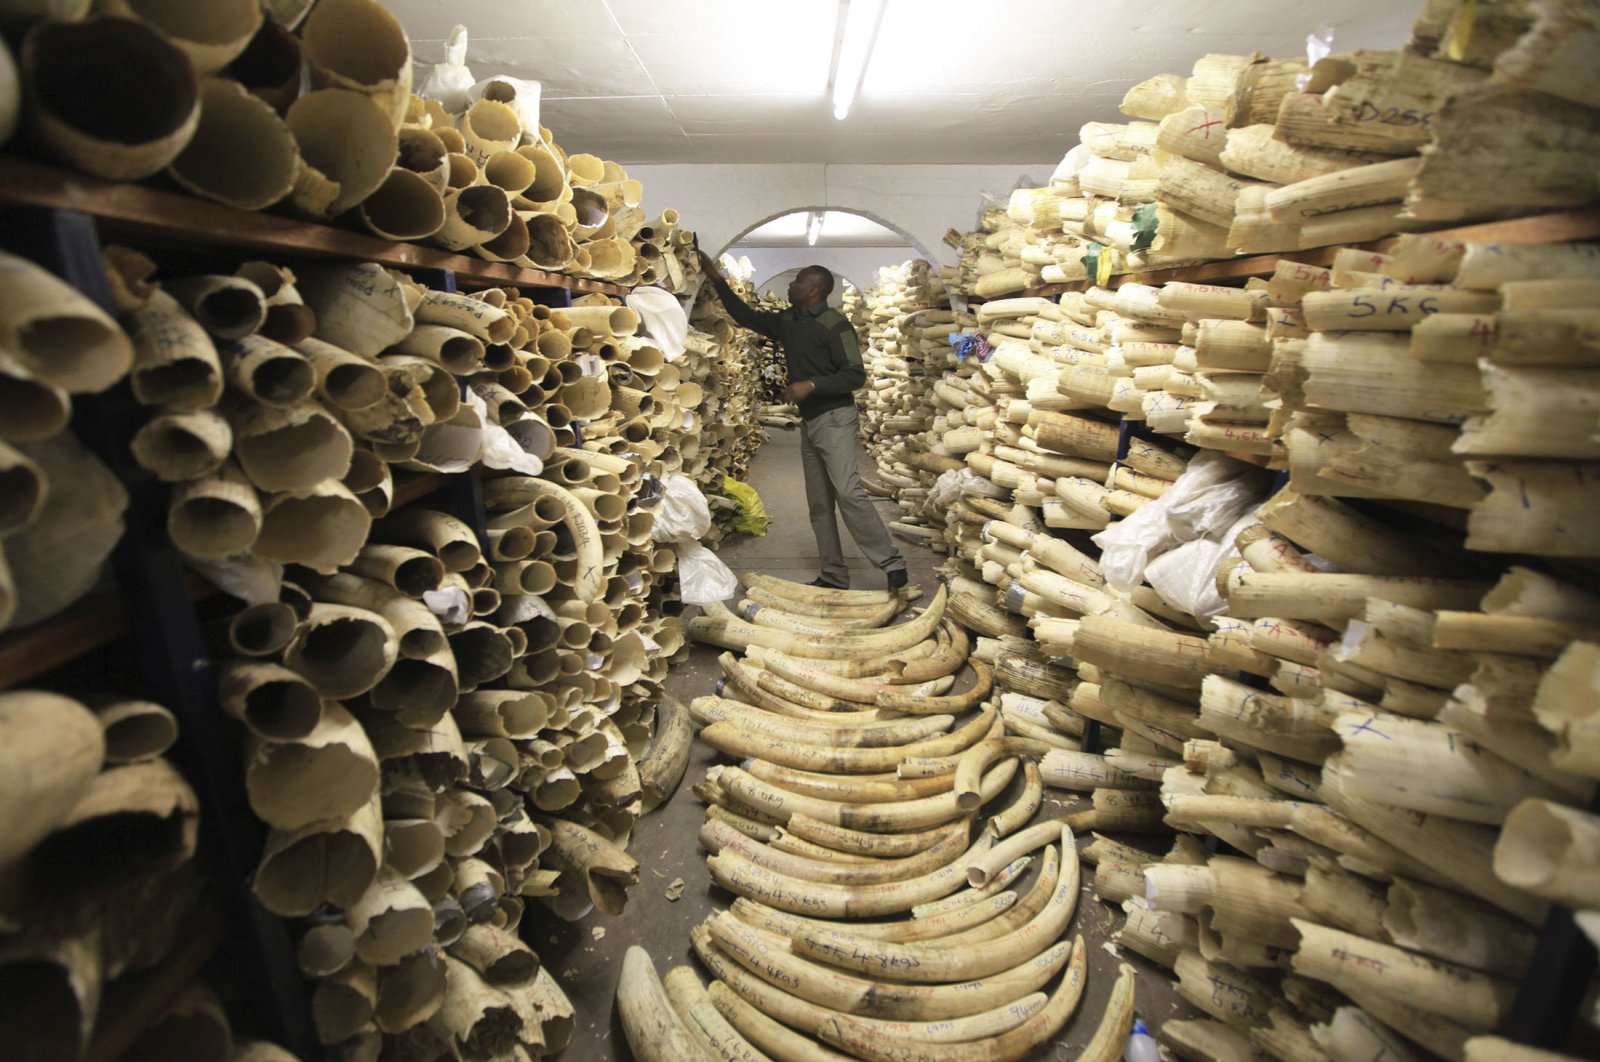 A Zimbabwe National Parks official looks over the country&#039;s ivory stockpile at the Zimbabwe National Parks Headquarters in Harare, Zimbabwe, June 2, 2016. (AP Photo)